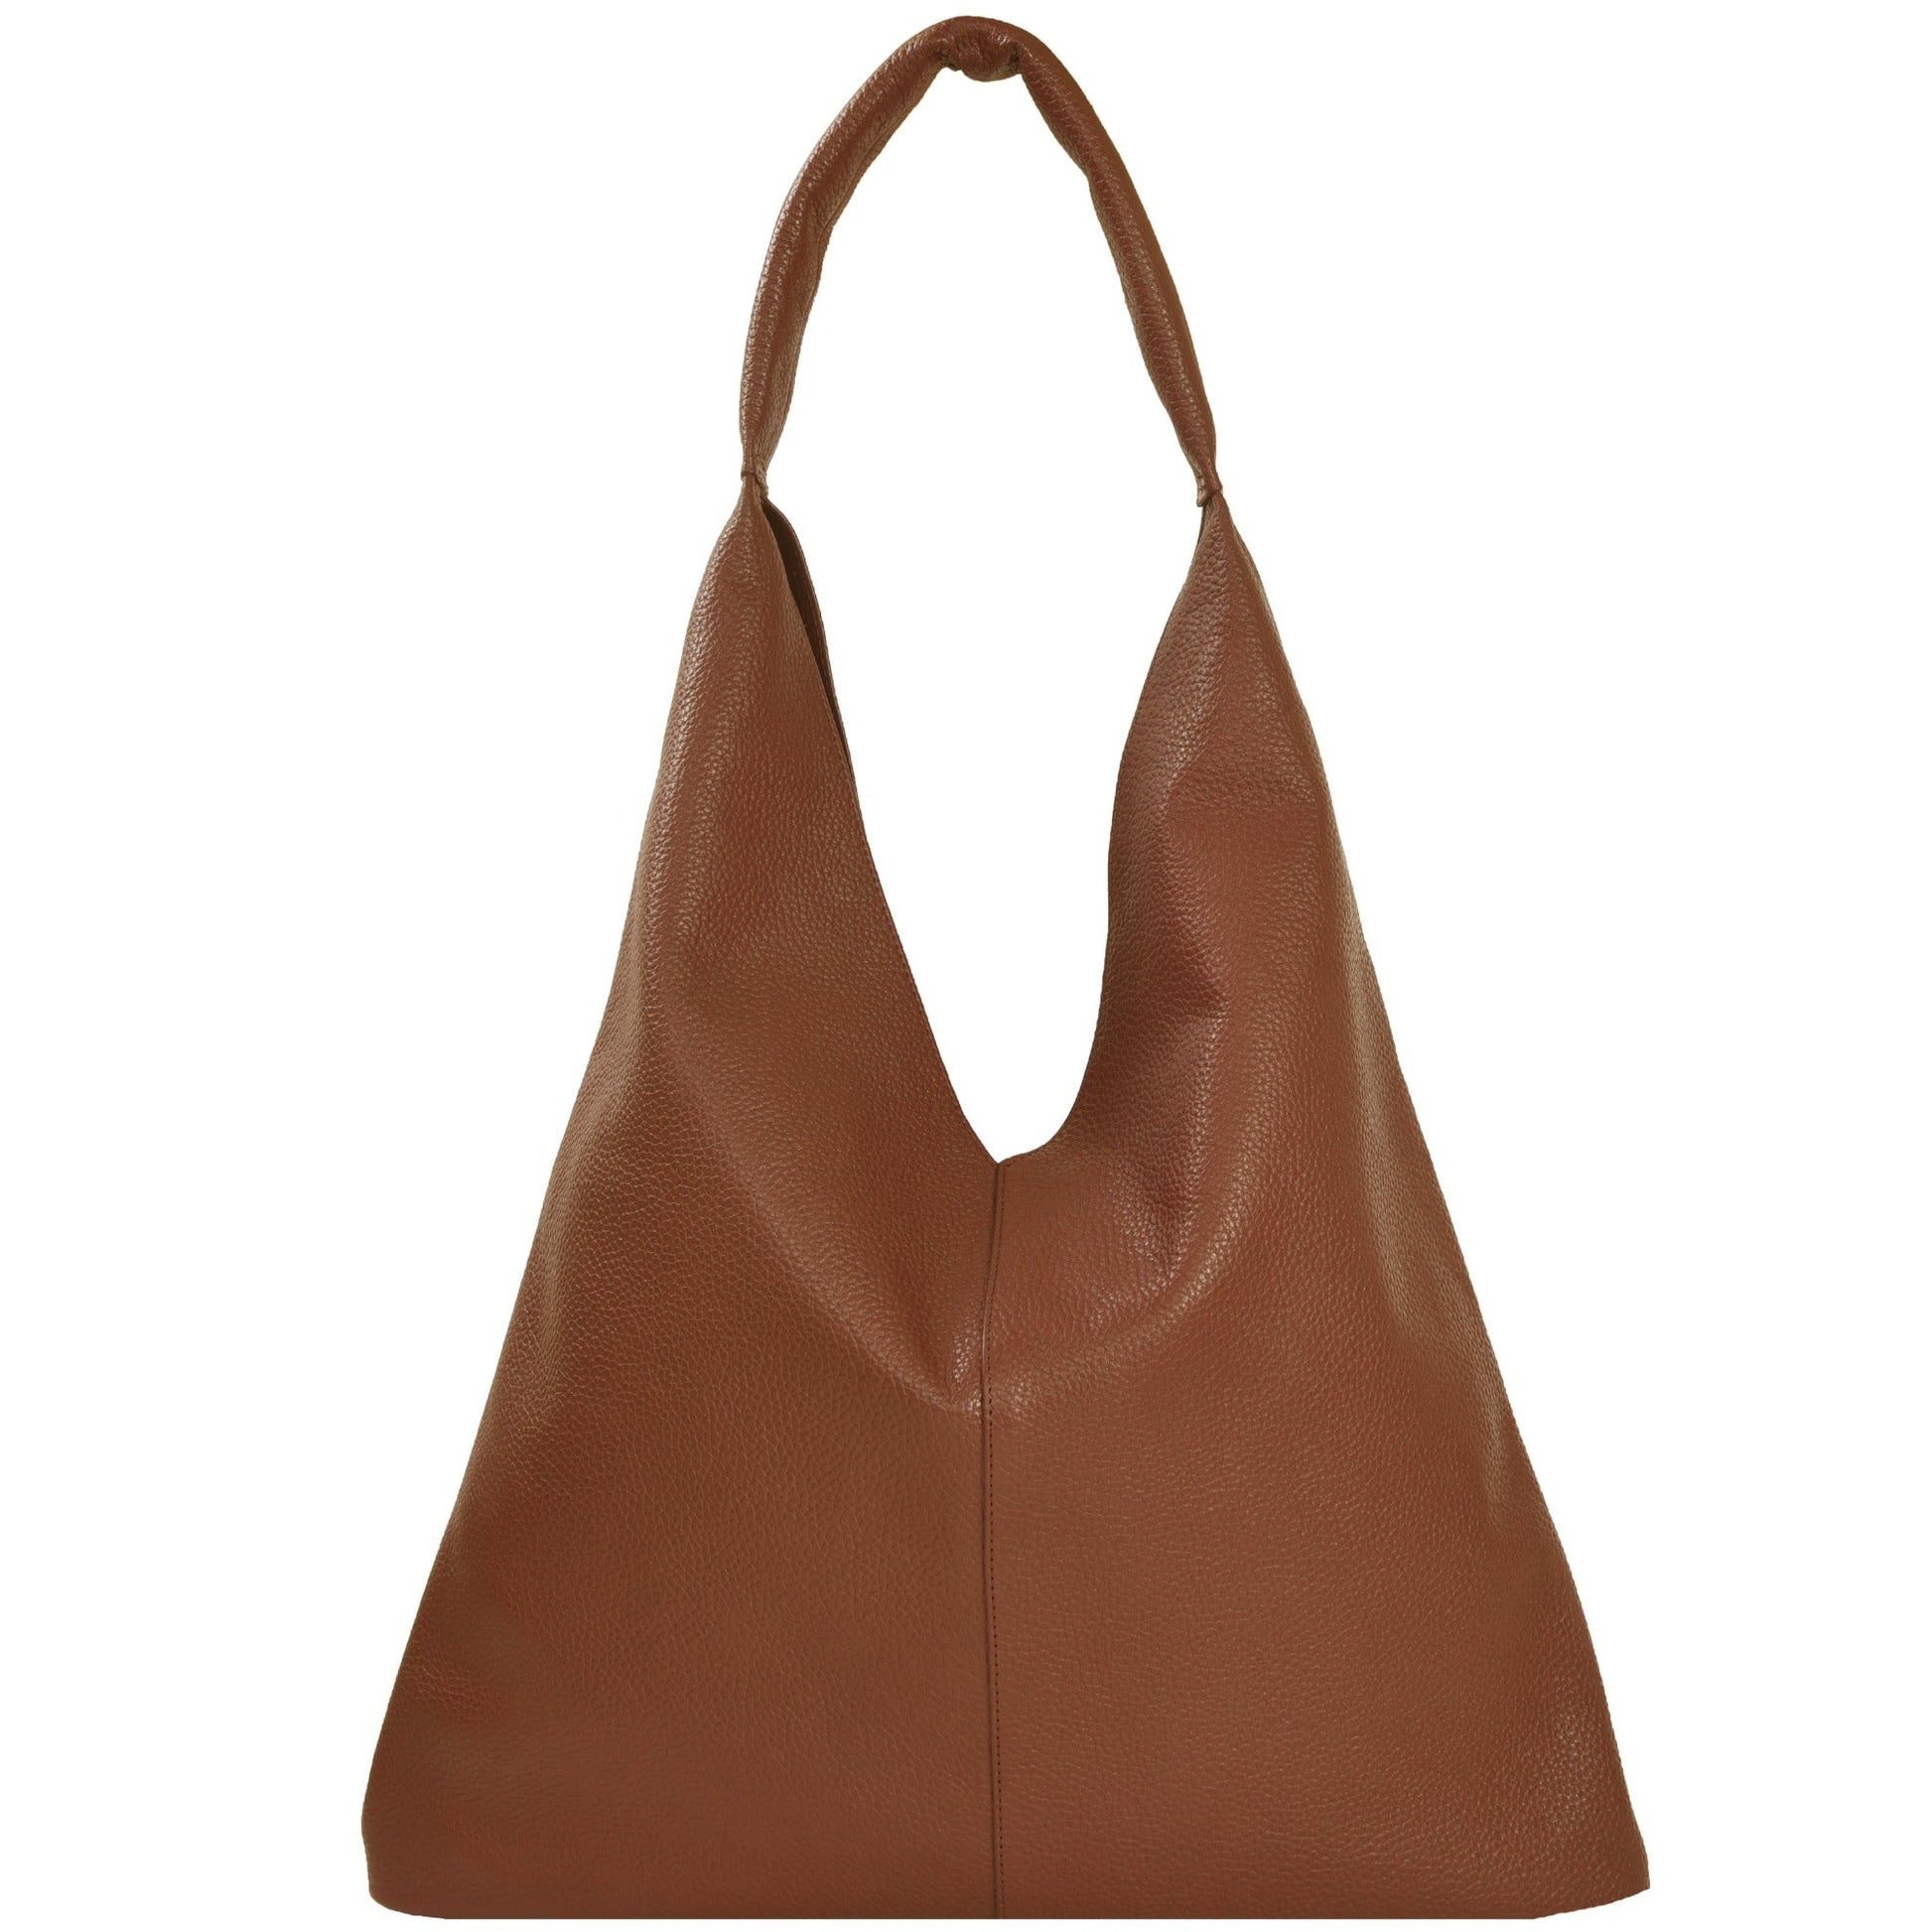 Camel Triangular leather tote bag brix and bailey ethical leather brand